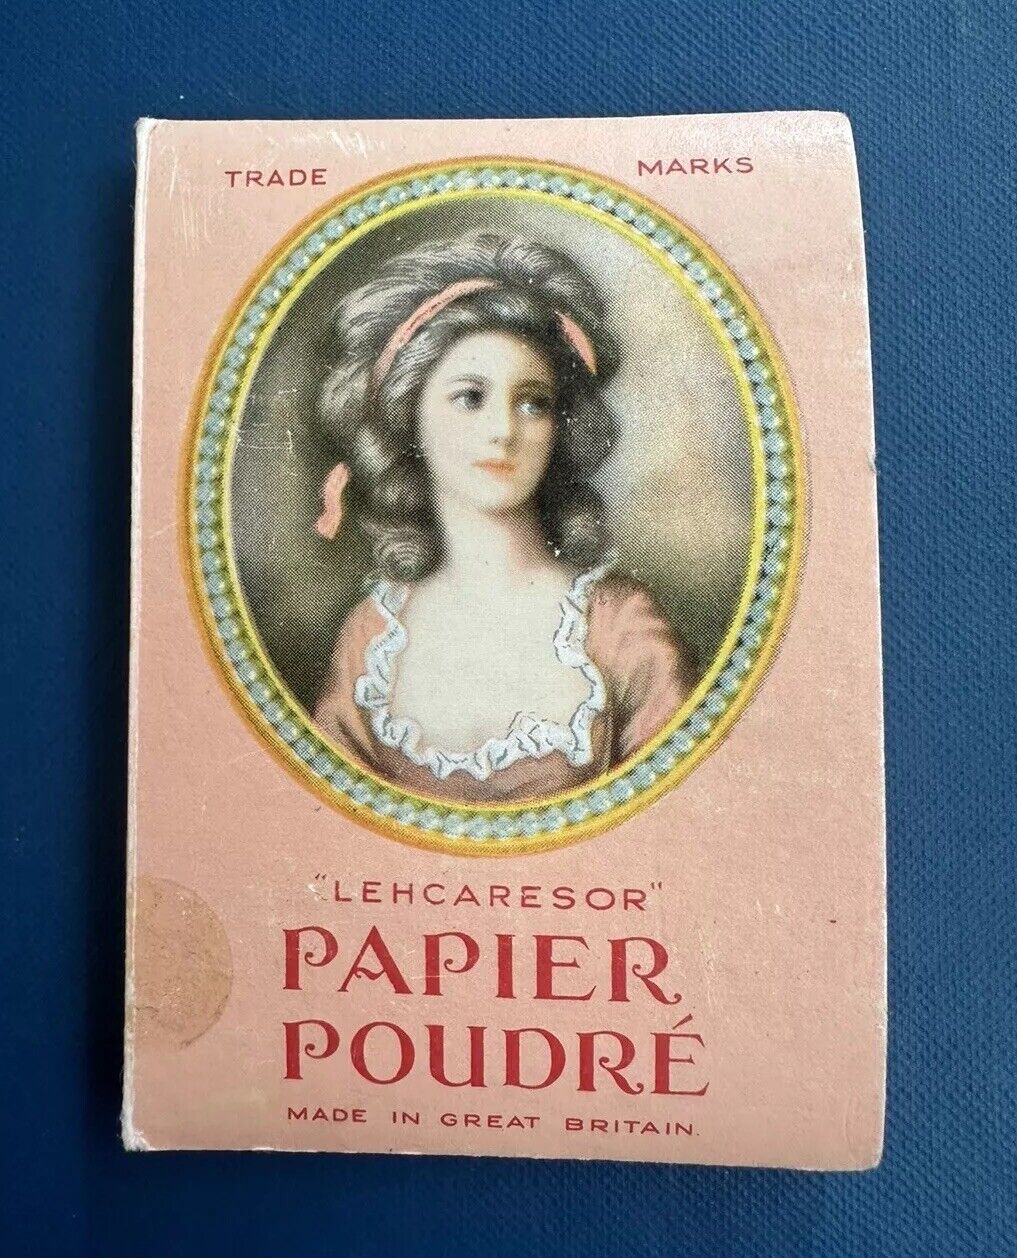 Antique 1920s Papier Poudré French style paper powder strips made in Britain